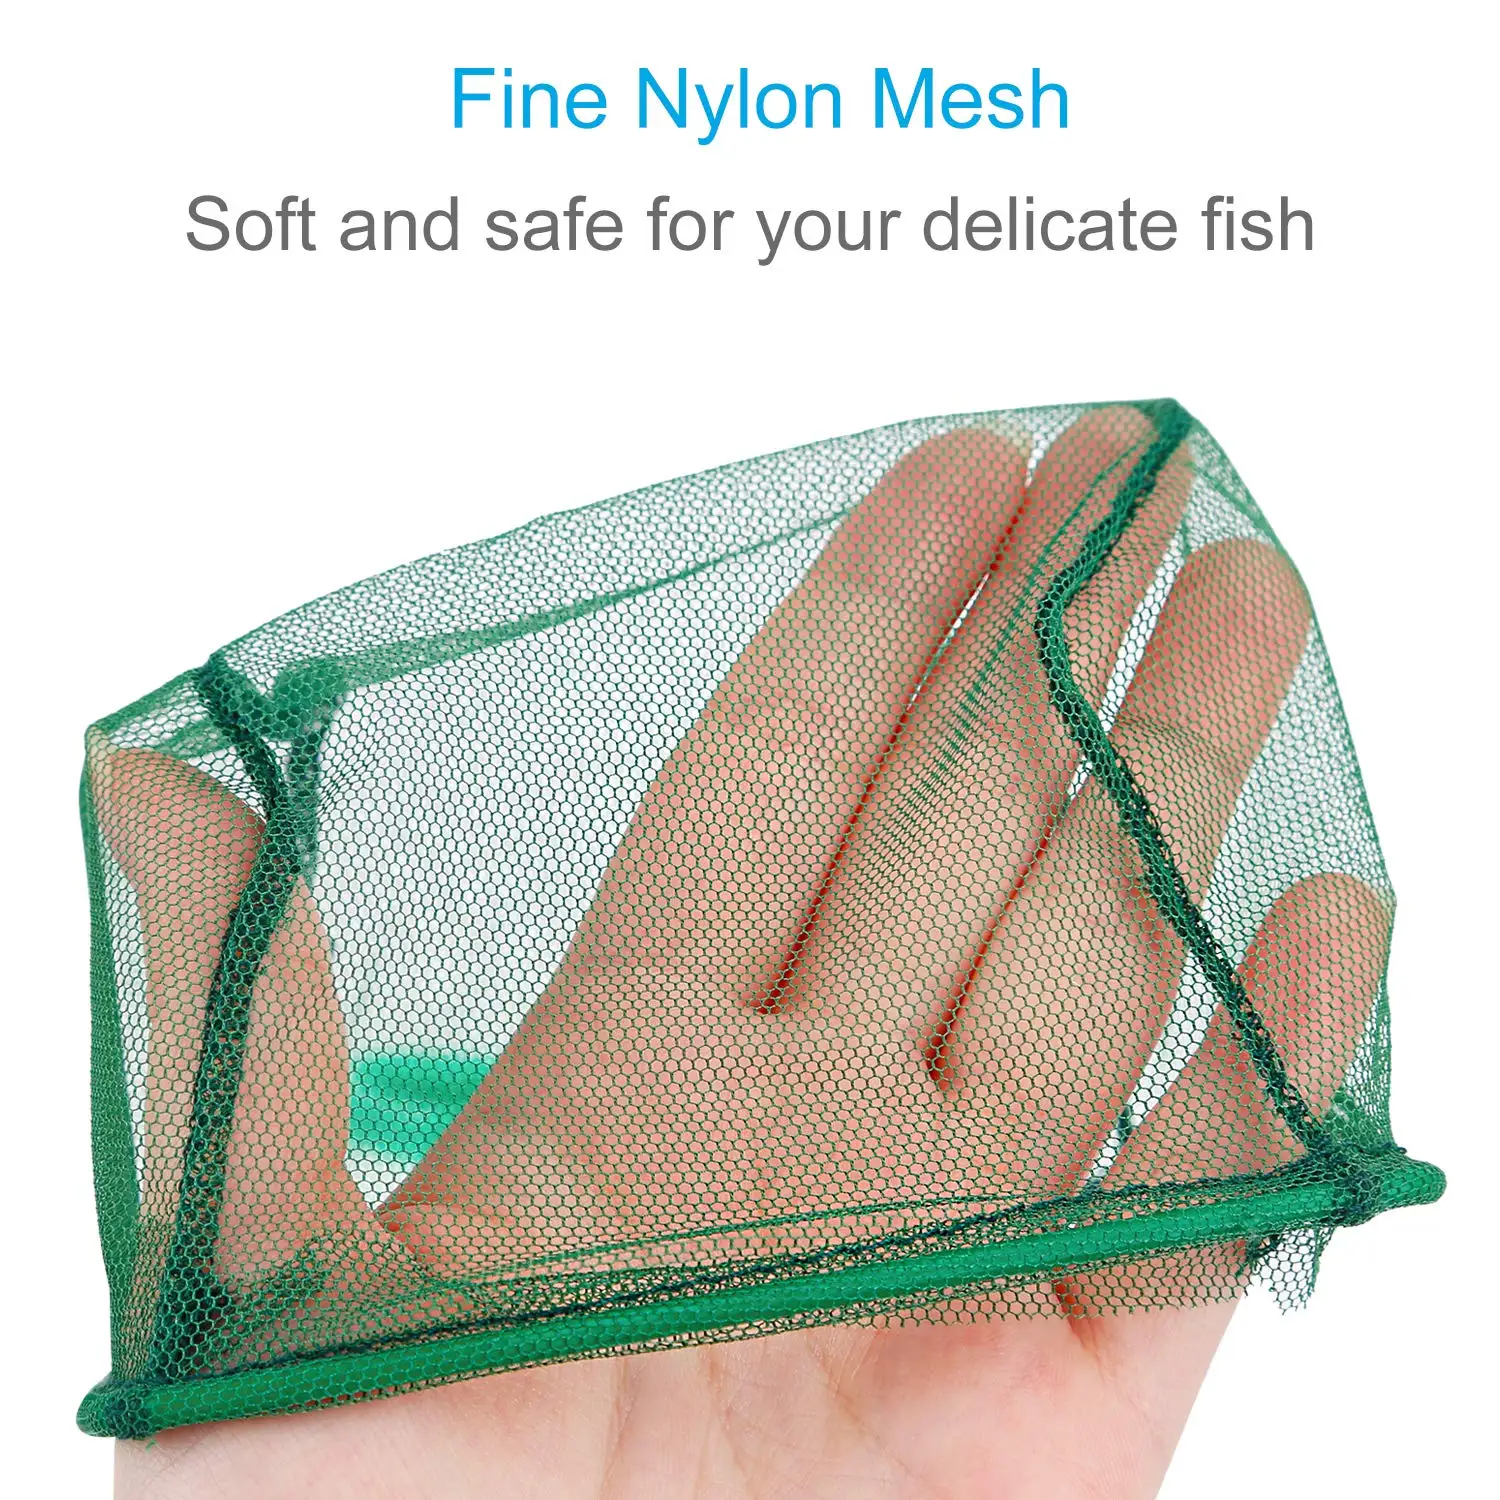 Fityle Set of 2 Aquarium Net Fine Mesh Small Fish Catch Nets with Plastic Handle Green 